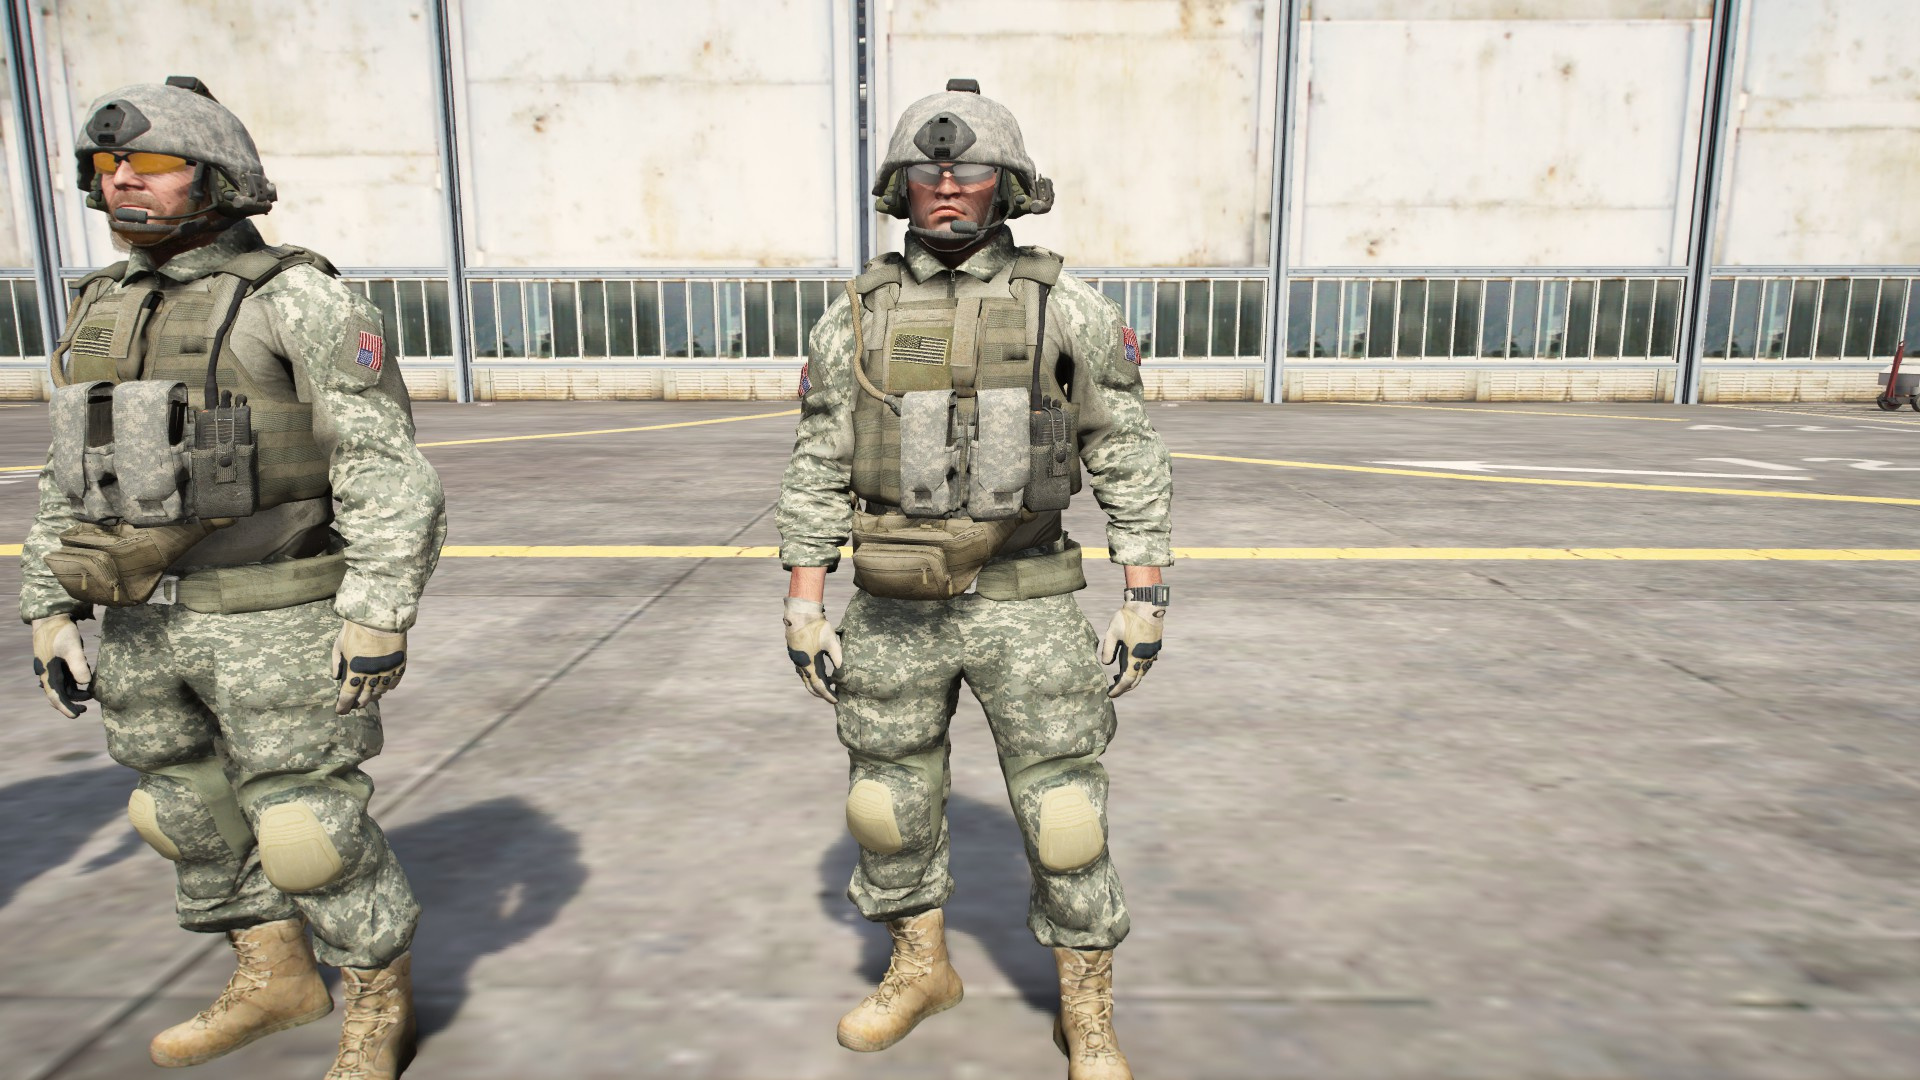 GTA V Online - 'Lone Survivor' Military Outfit Guide 